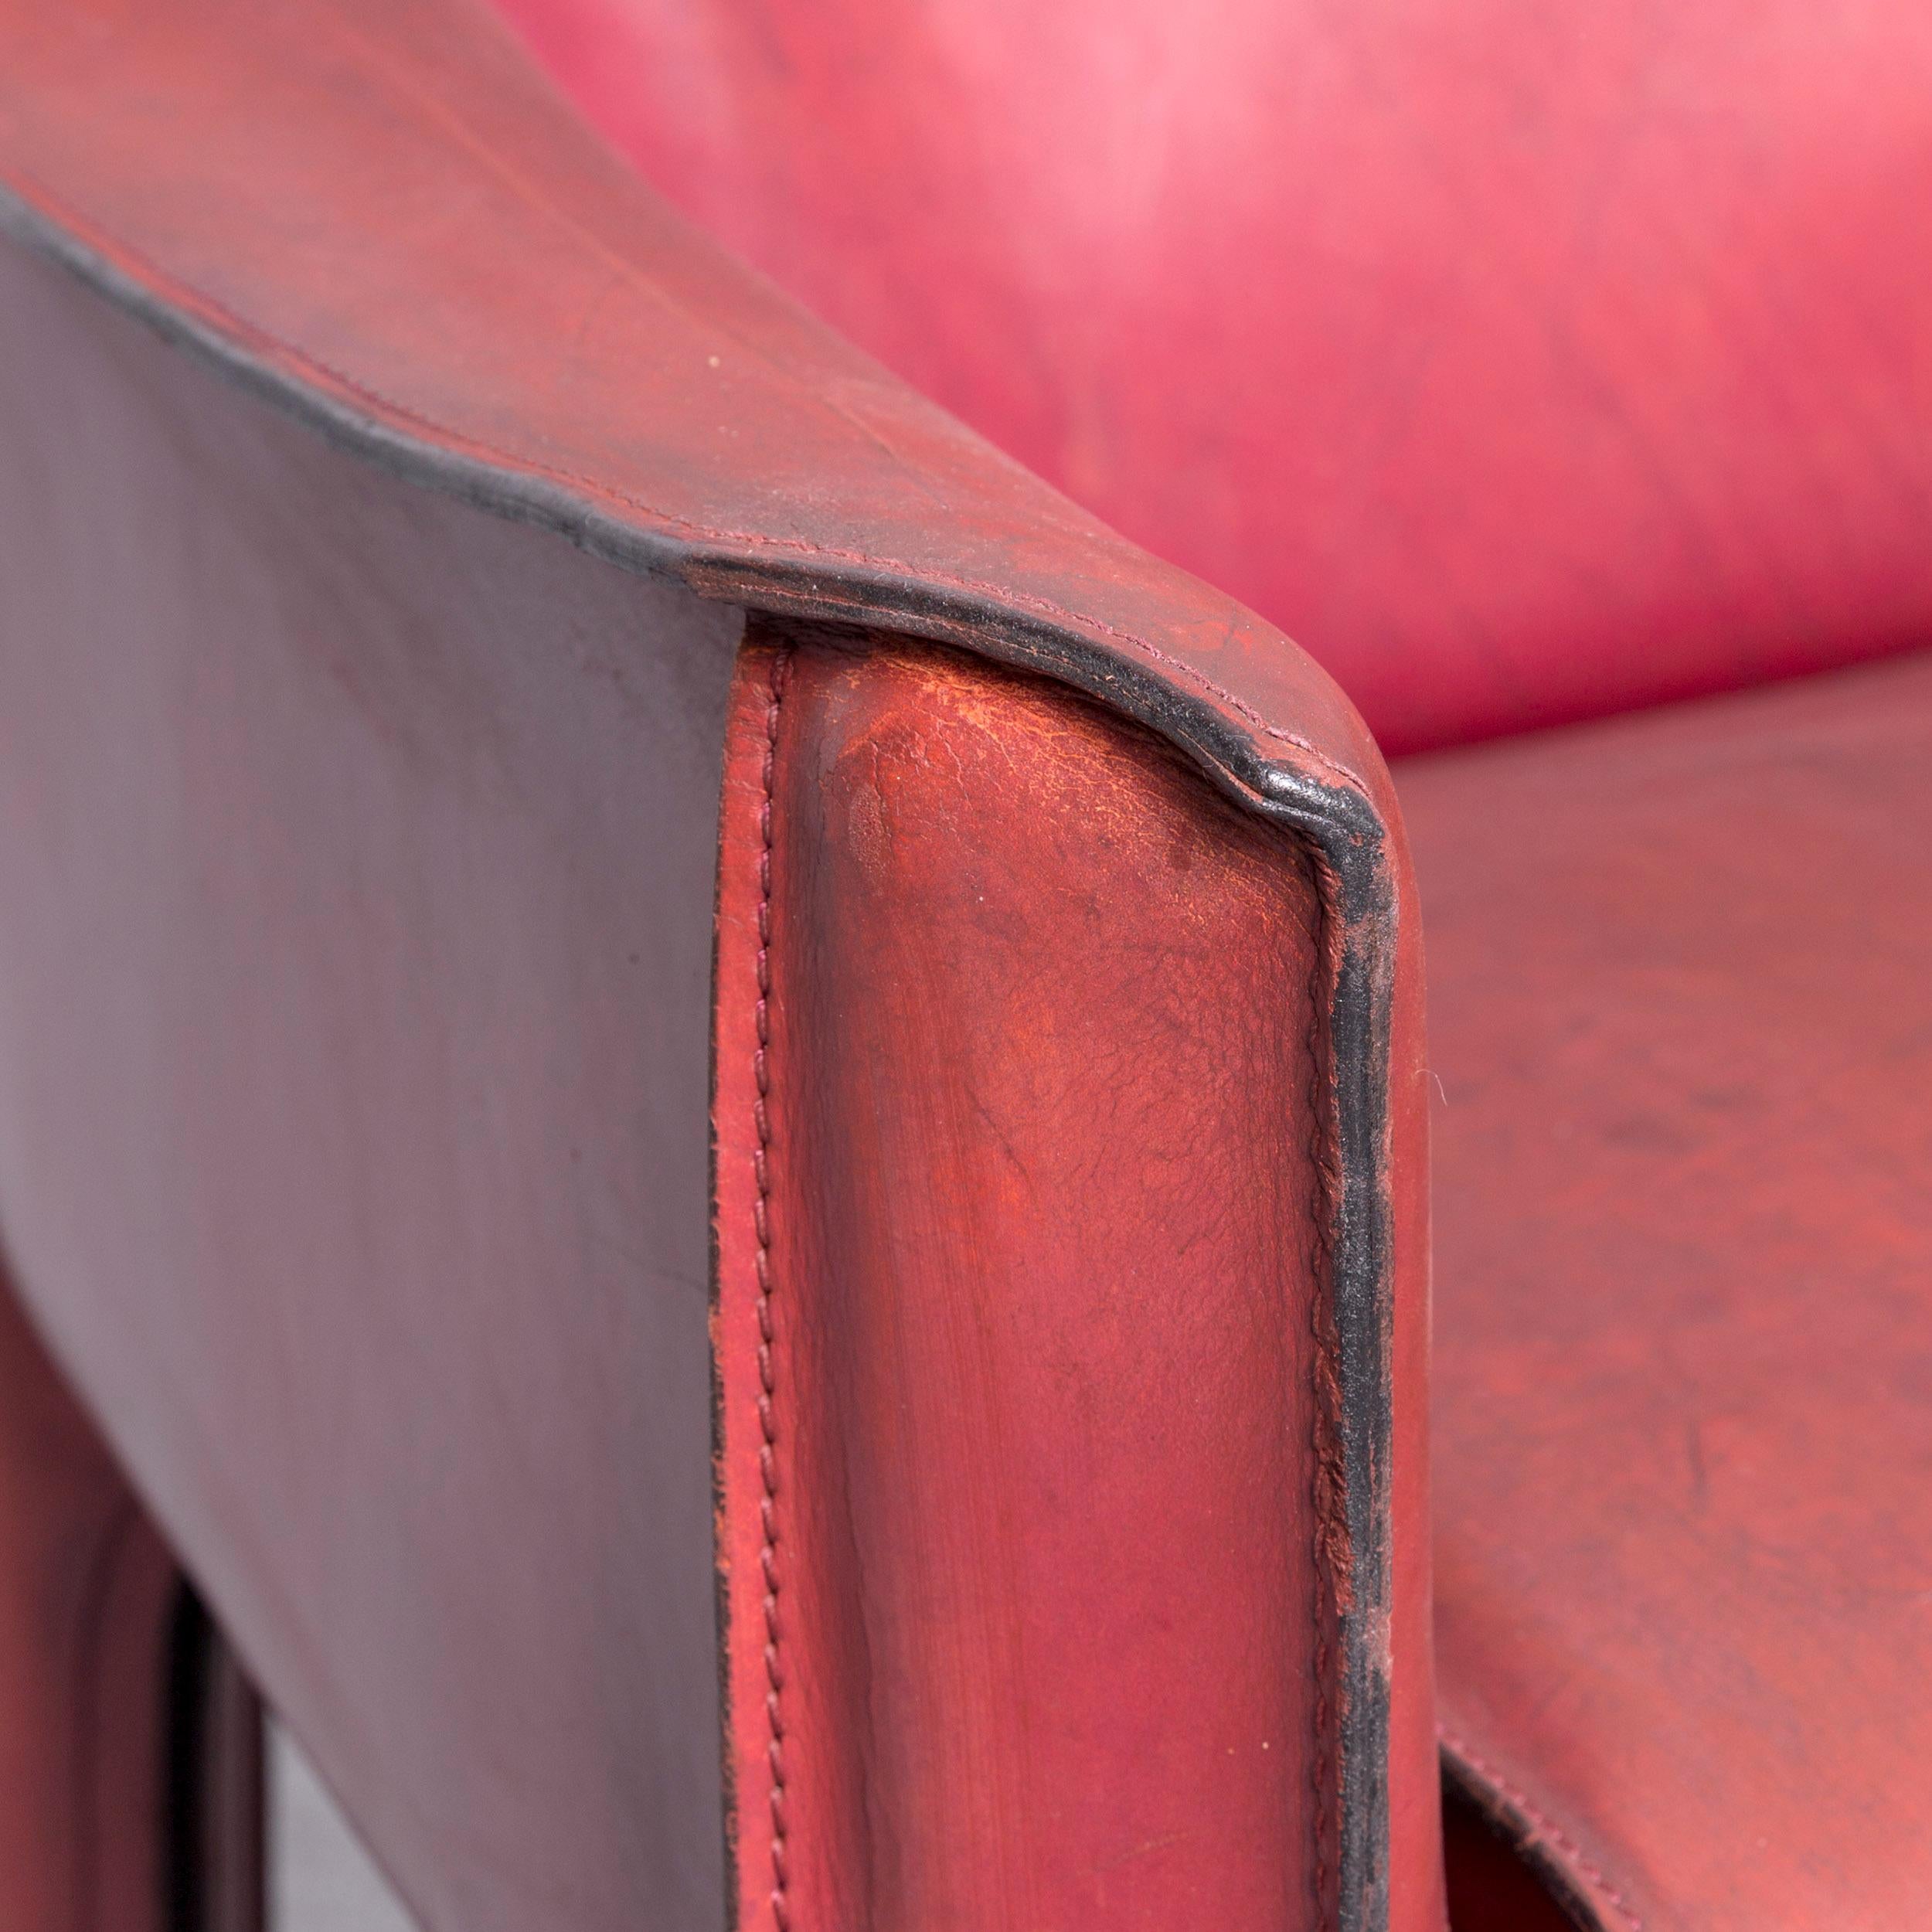 Contemporary Cassina Cab 414 Vintage Leather Armchair Red by Mario Belinni 1970-1979